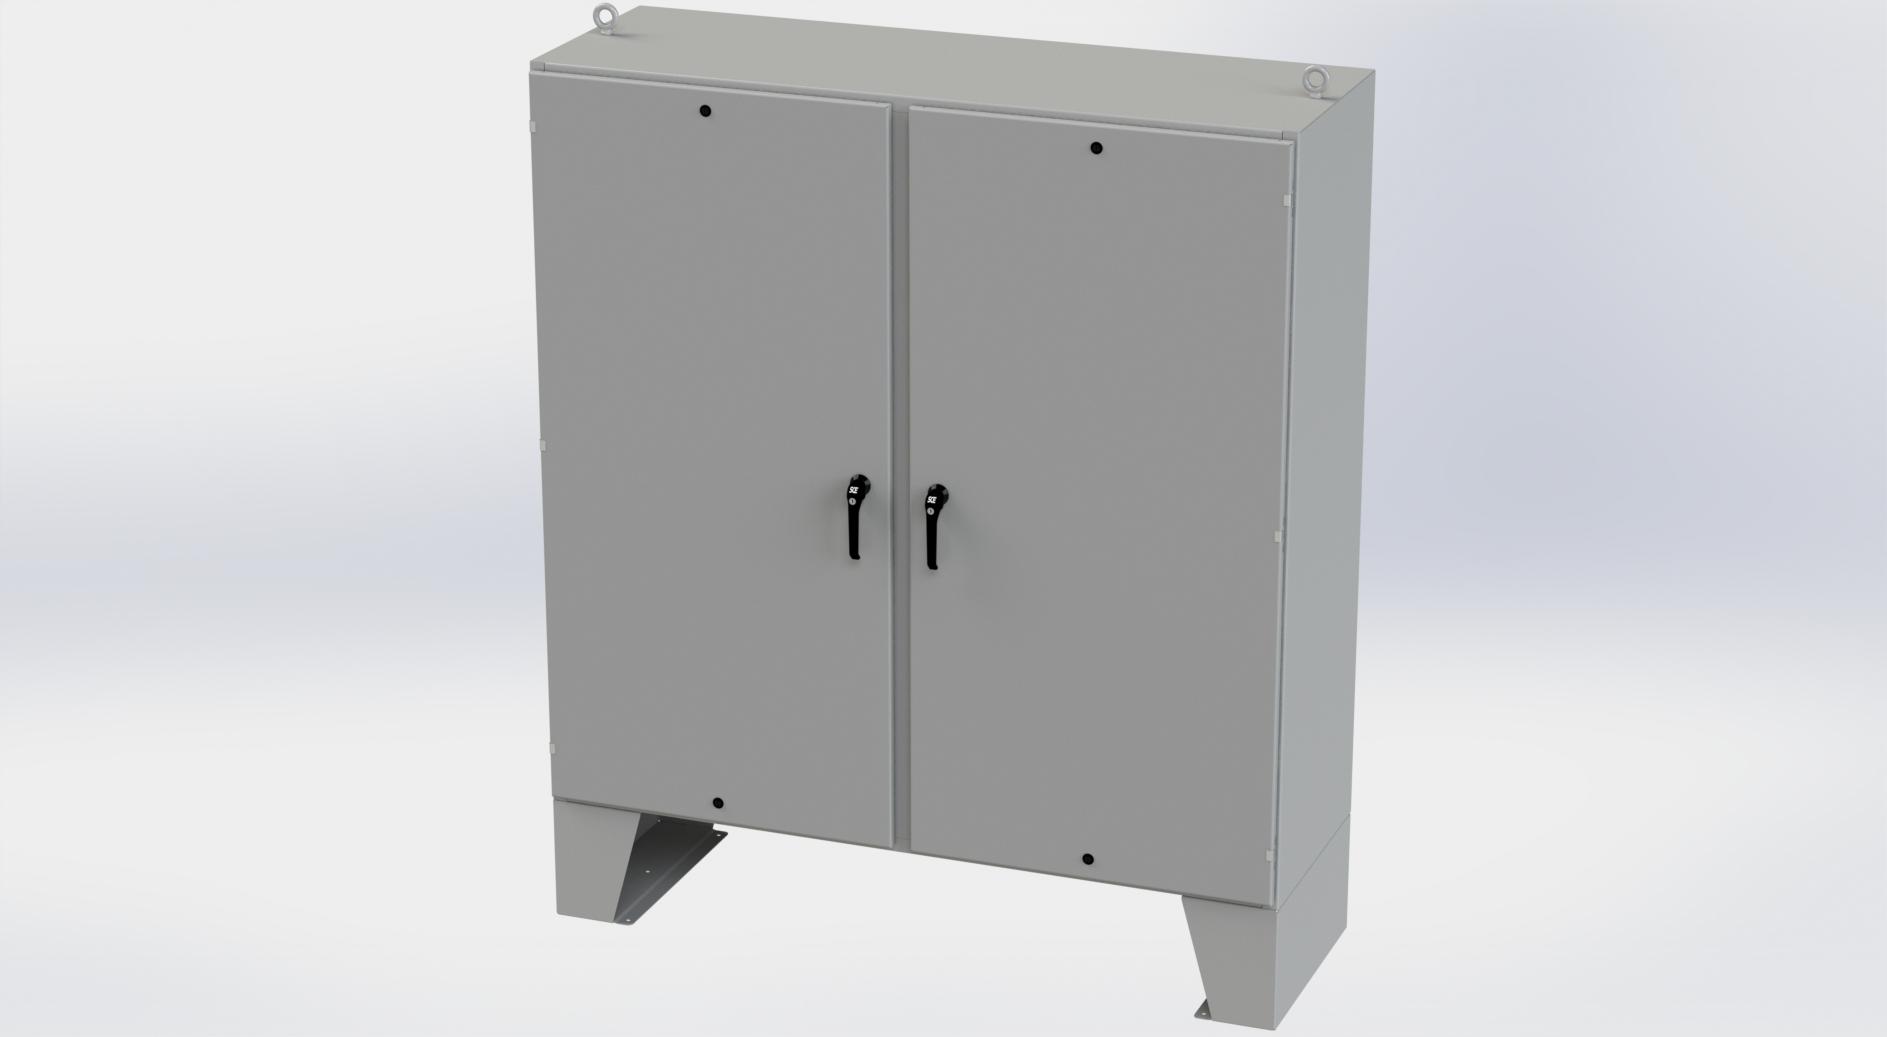 Saginaw Control SCE-72EL7224LPPL 2DR EL LPPL Enclosure, Height:72.00", Width:72.00", Depth:24.00", ANSI-61 gray powder coating inside and out. Optional sub-panels are powder coated white.